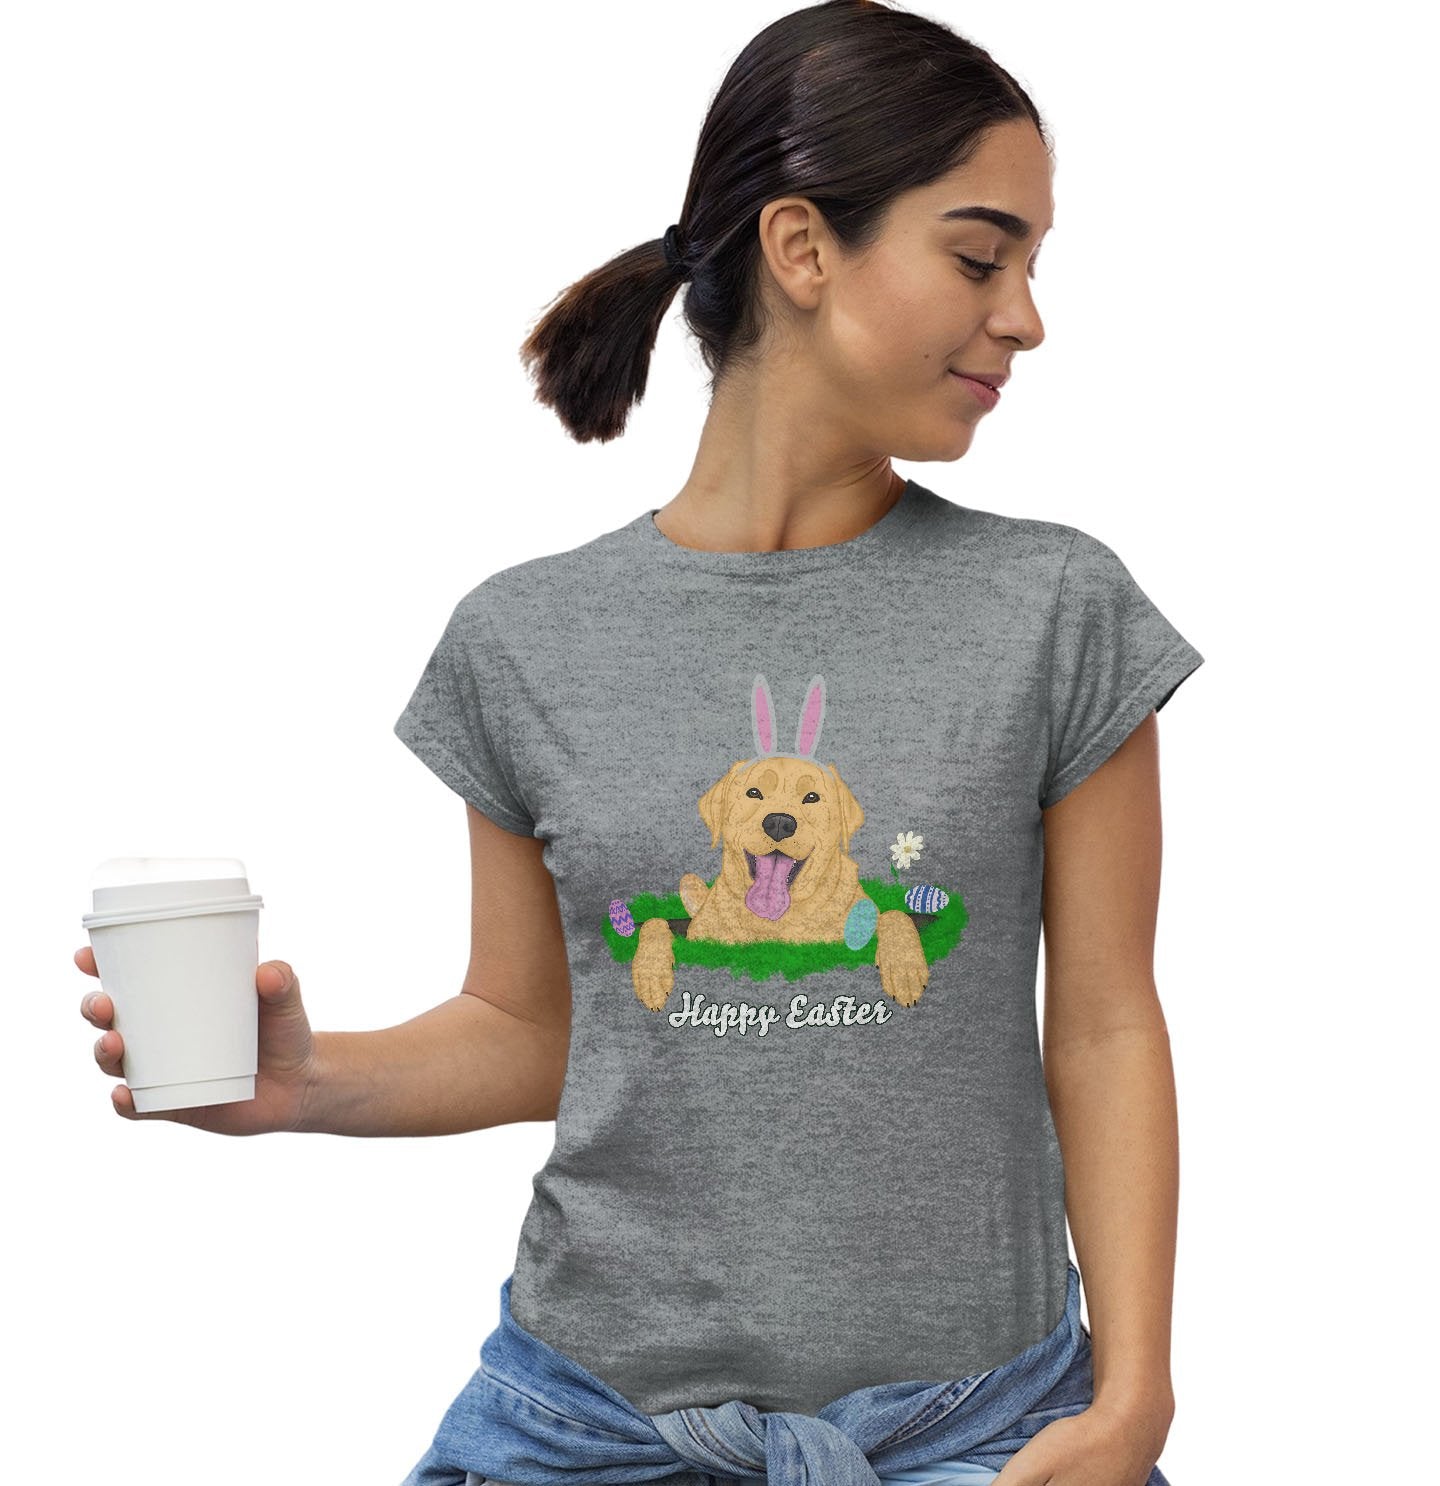 Rabbit Hole Yellow Labrador  - Women's Fitted T-Shirt